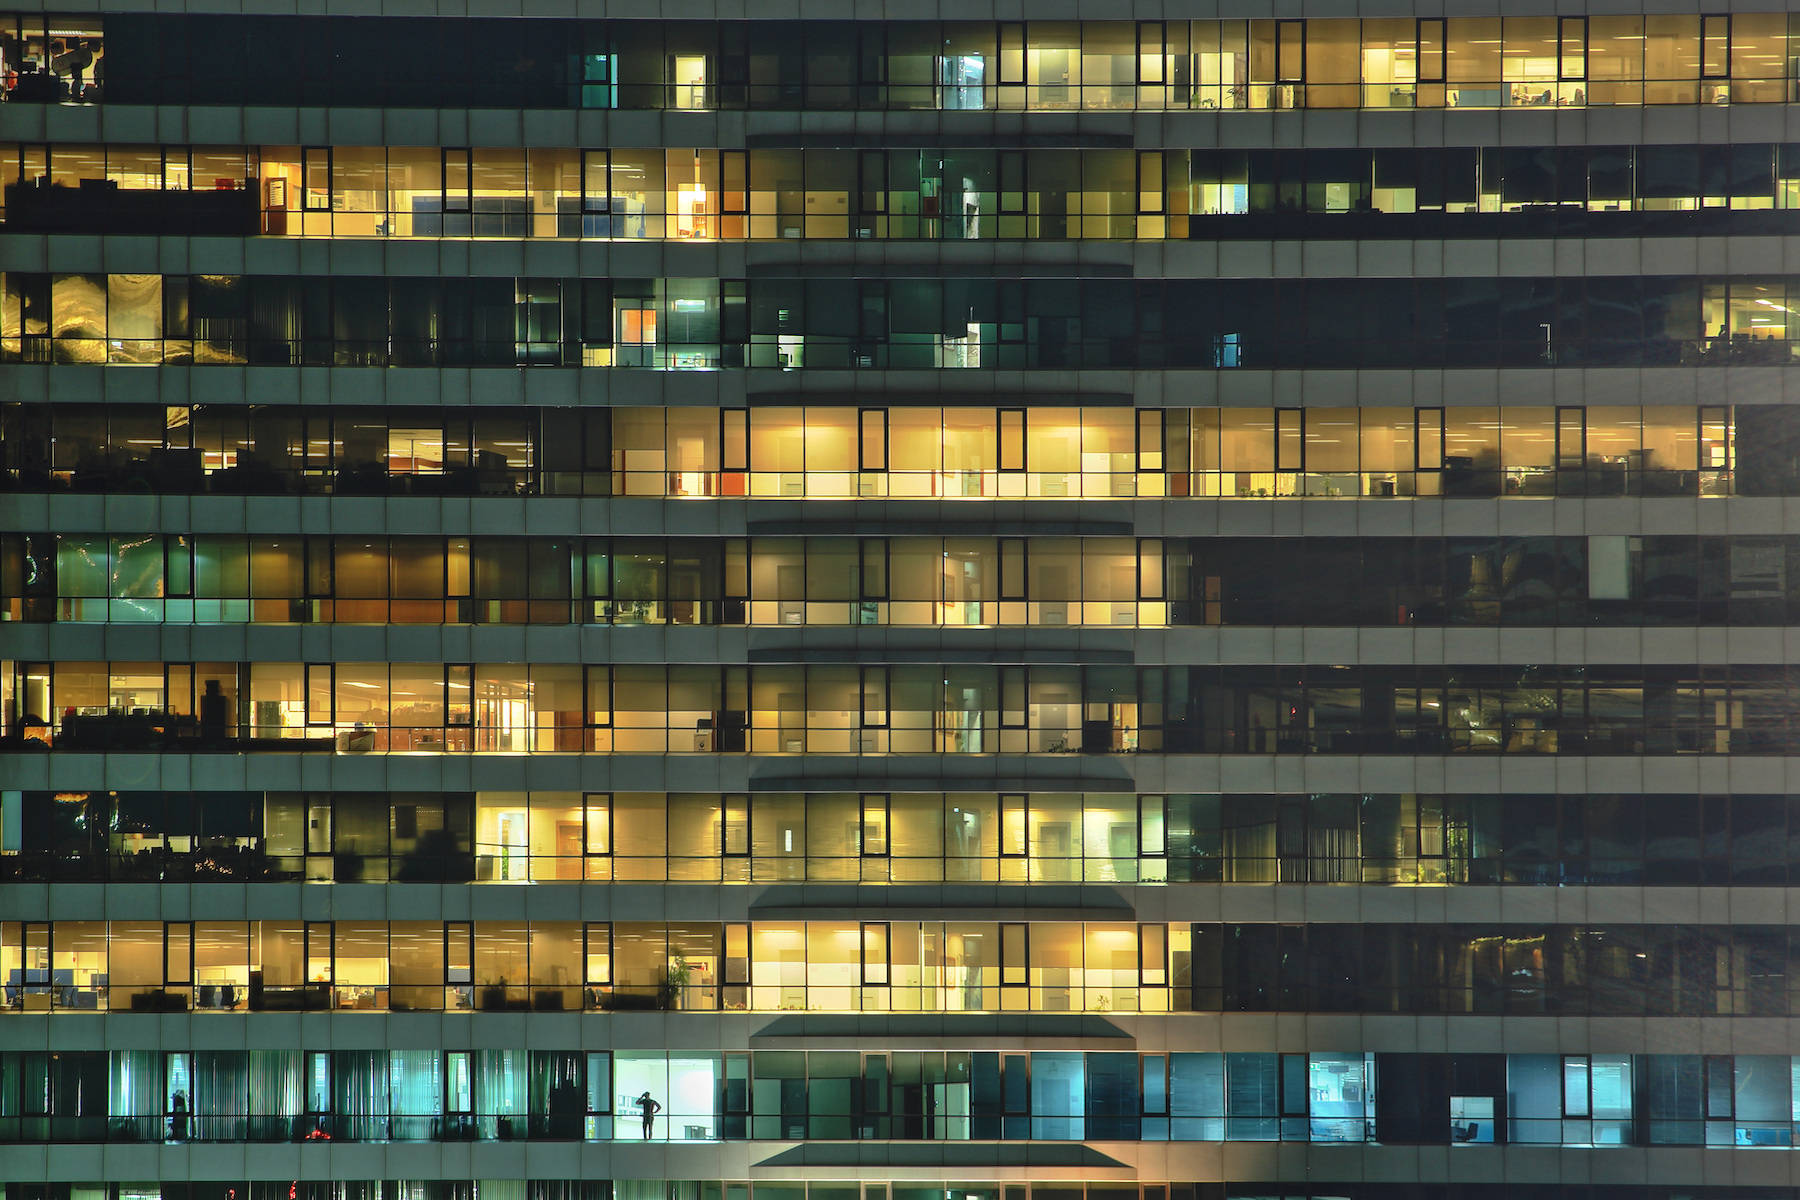 An office building is lit up at night